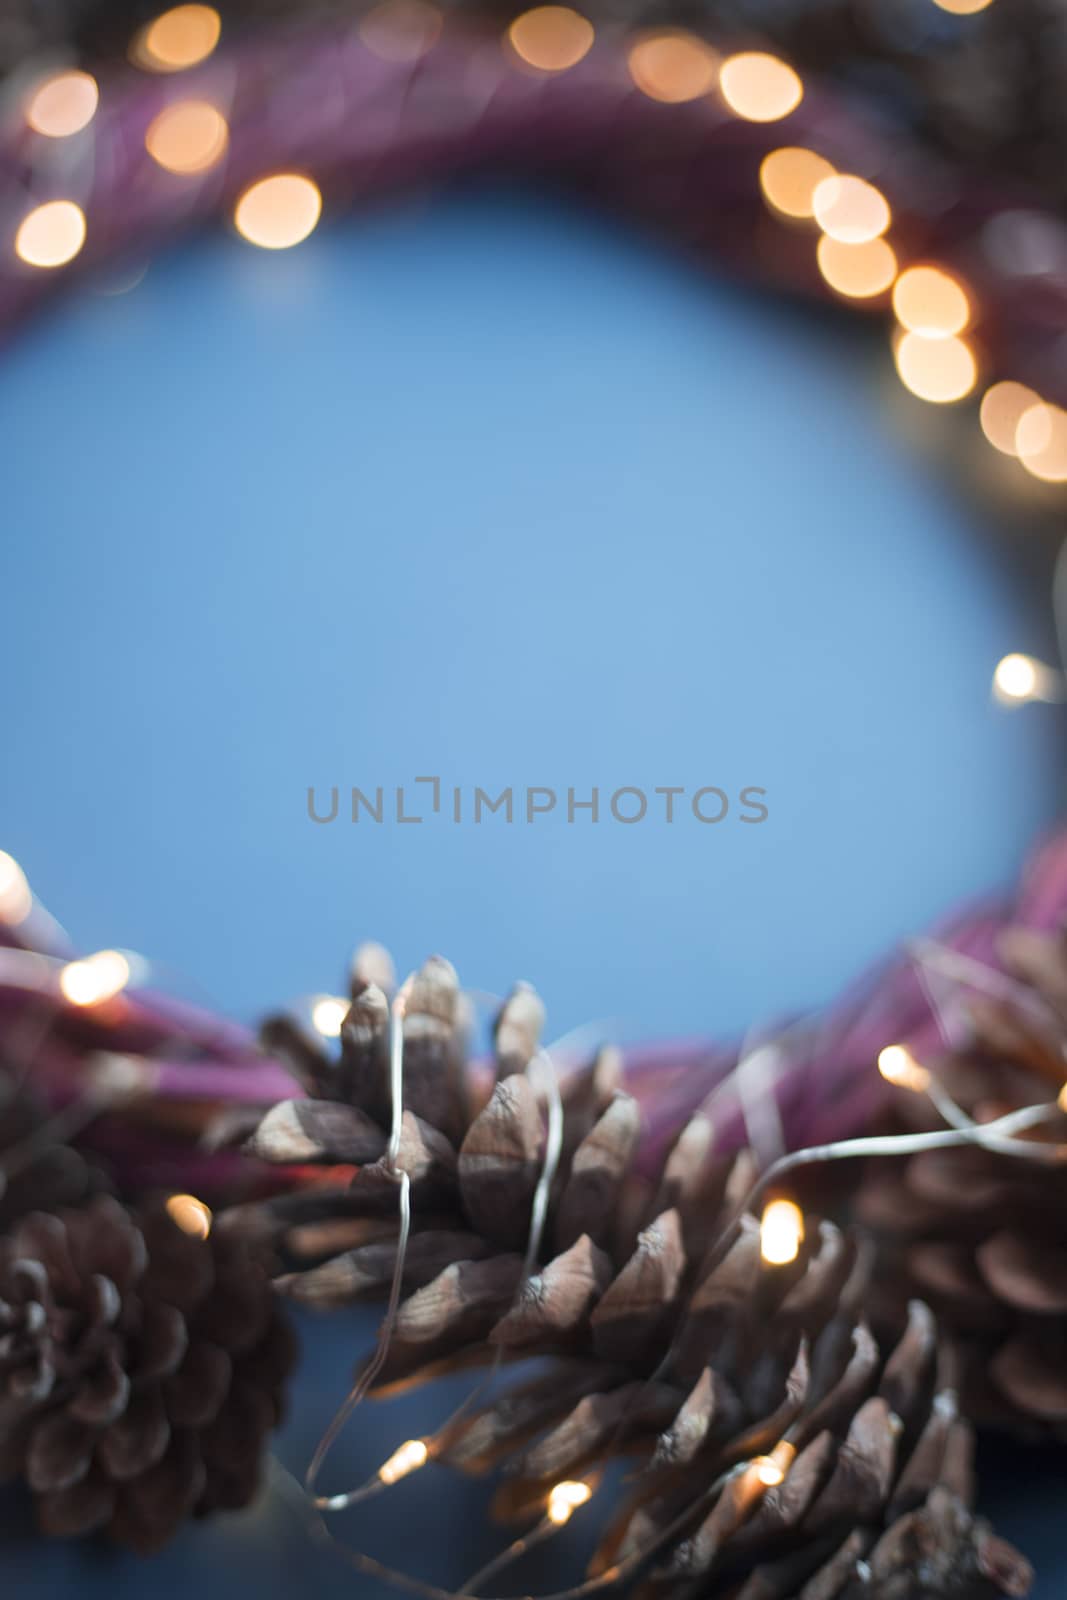 Christmas wreath of pine cones and glowing lights garland on blue background copy space text